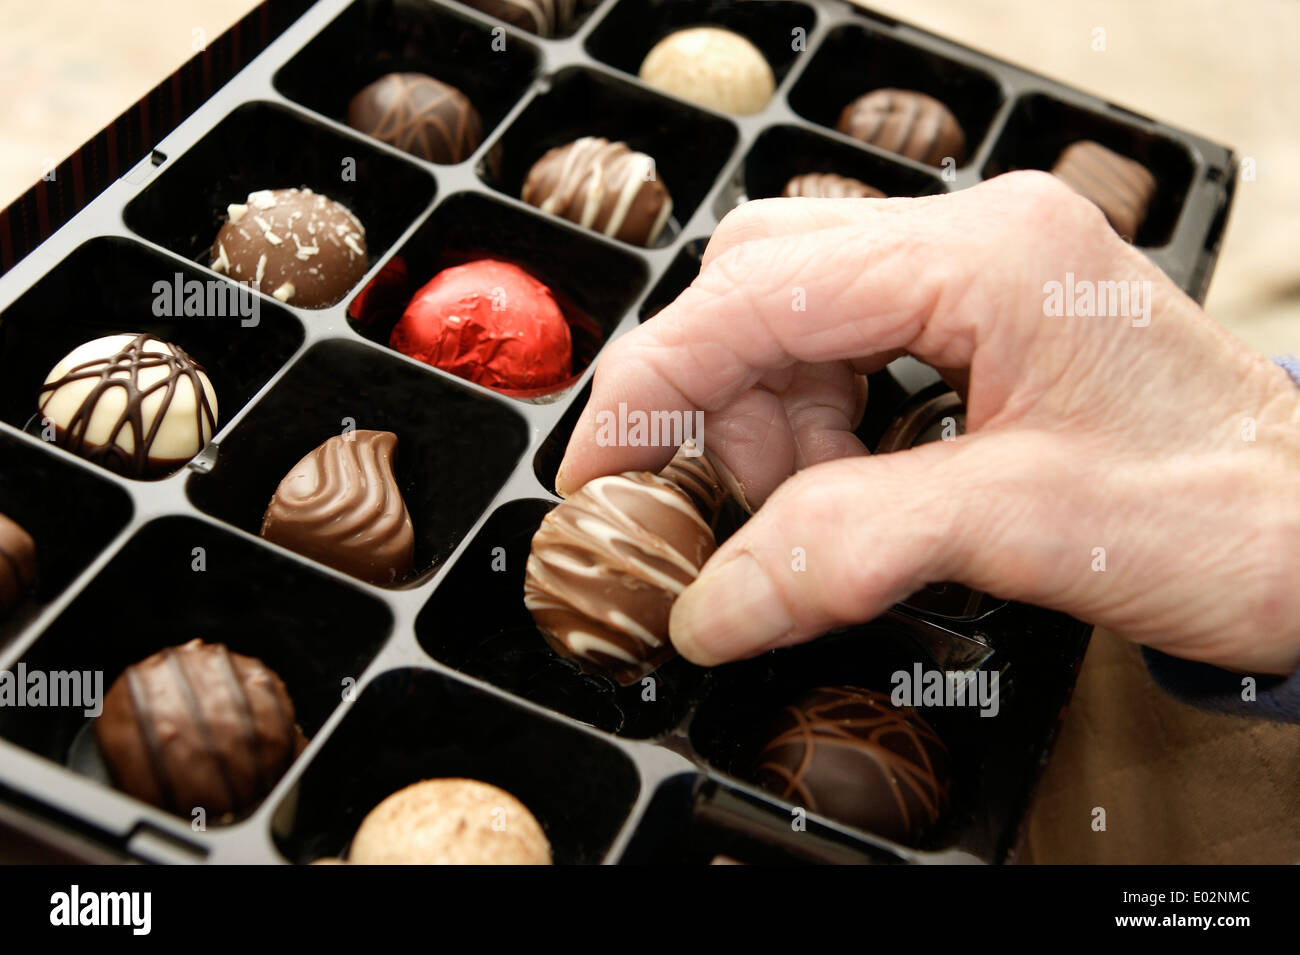 Elderly woman helping herself to a chocolate from a box of chocolates Stock Photo